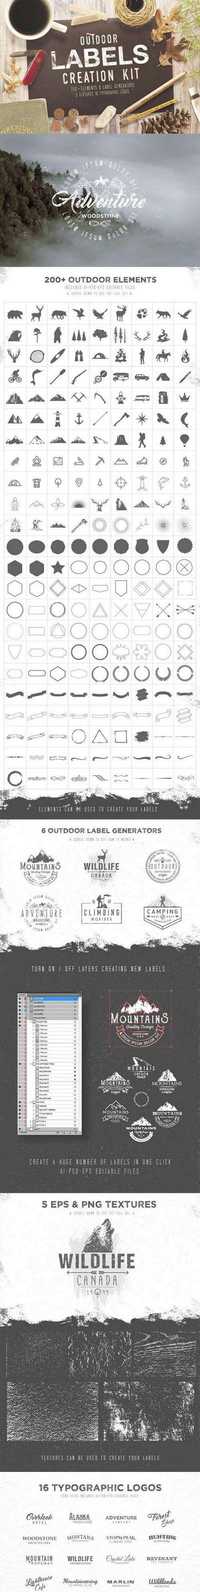 OUTDOOR LABELS CREATION KIT 1059561